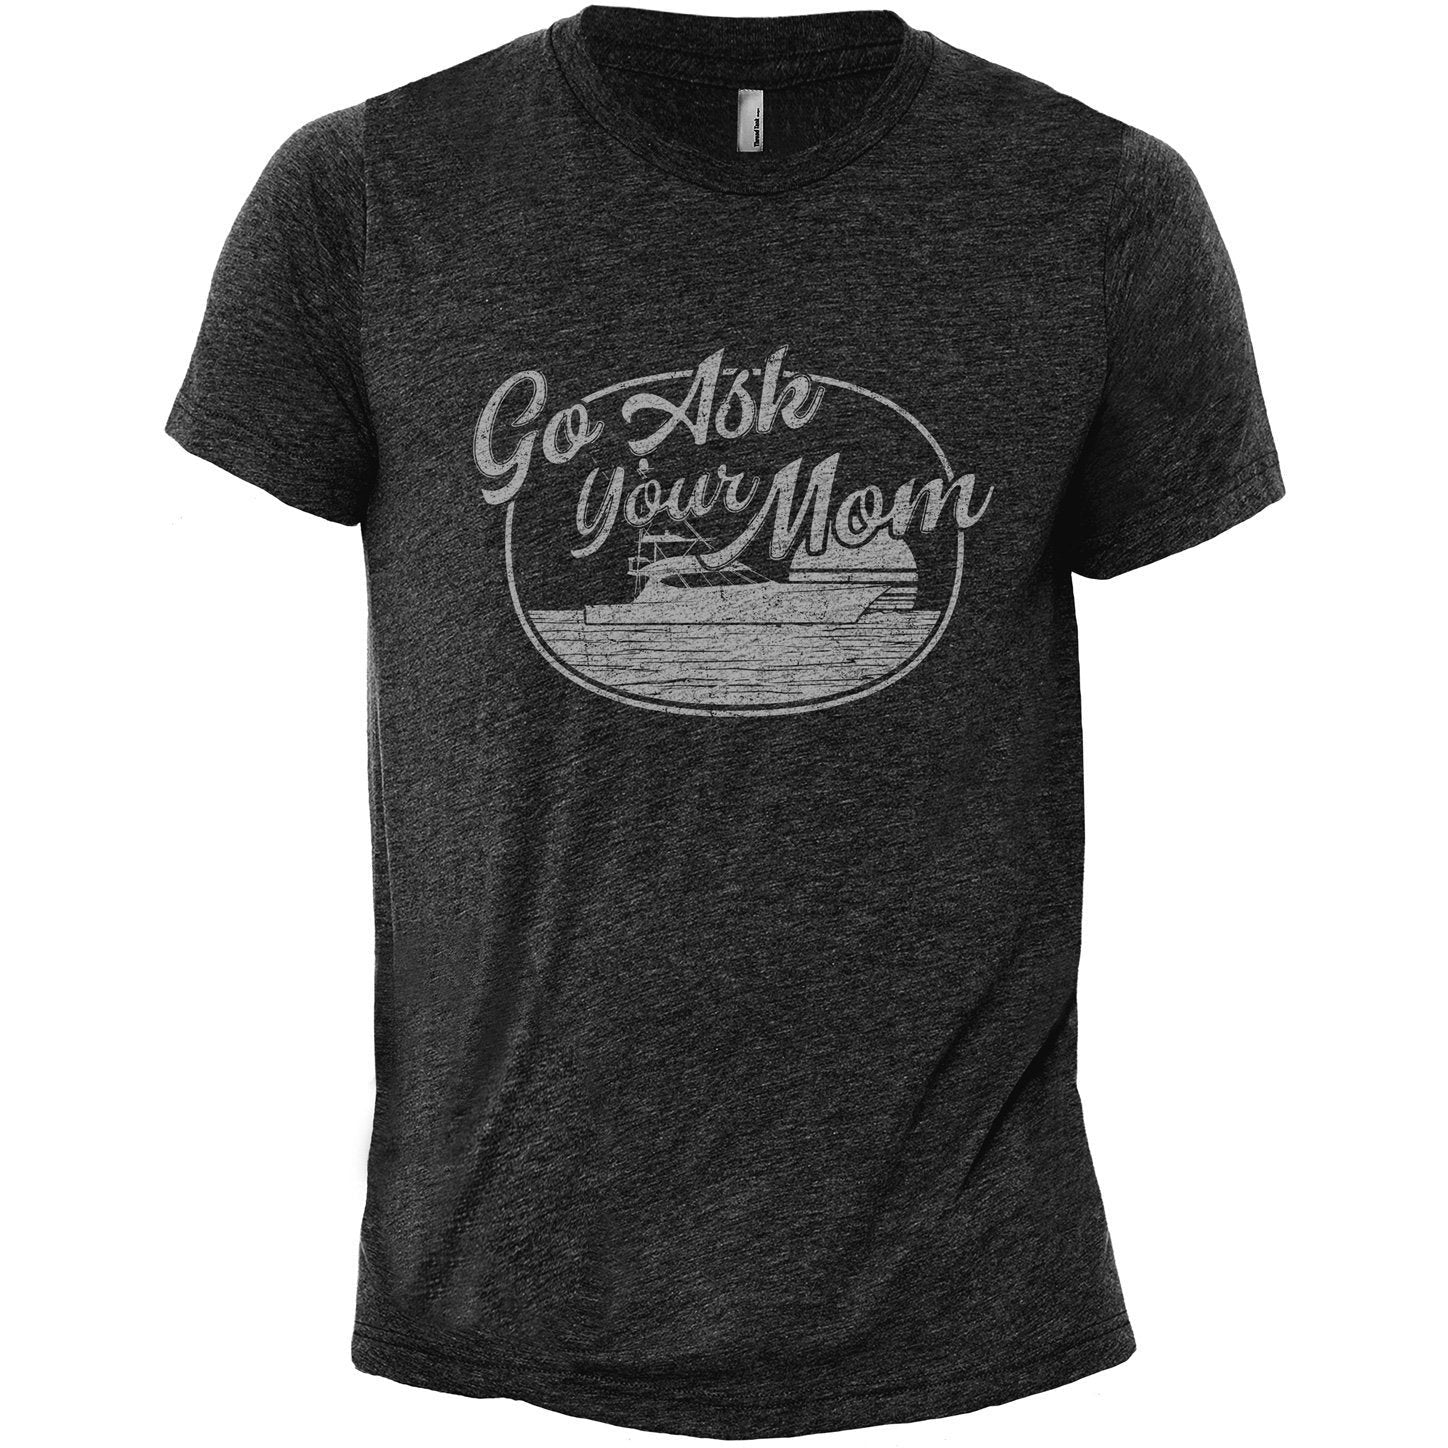 Go Ask Your Mom Heather Grey Printed Graphic Men's Crew T-Shirt Tee